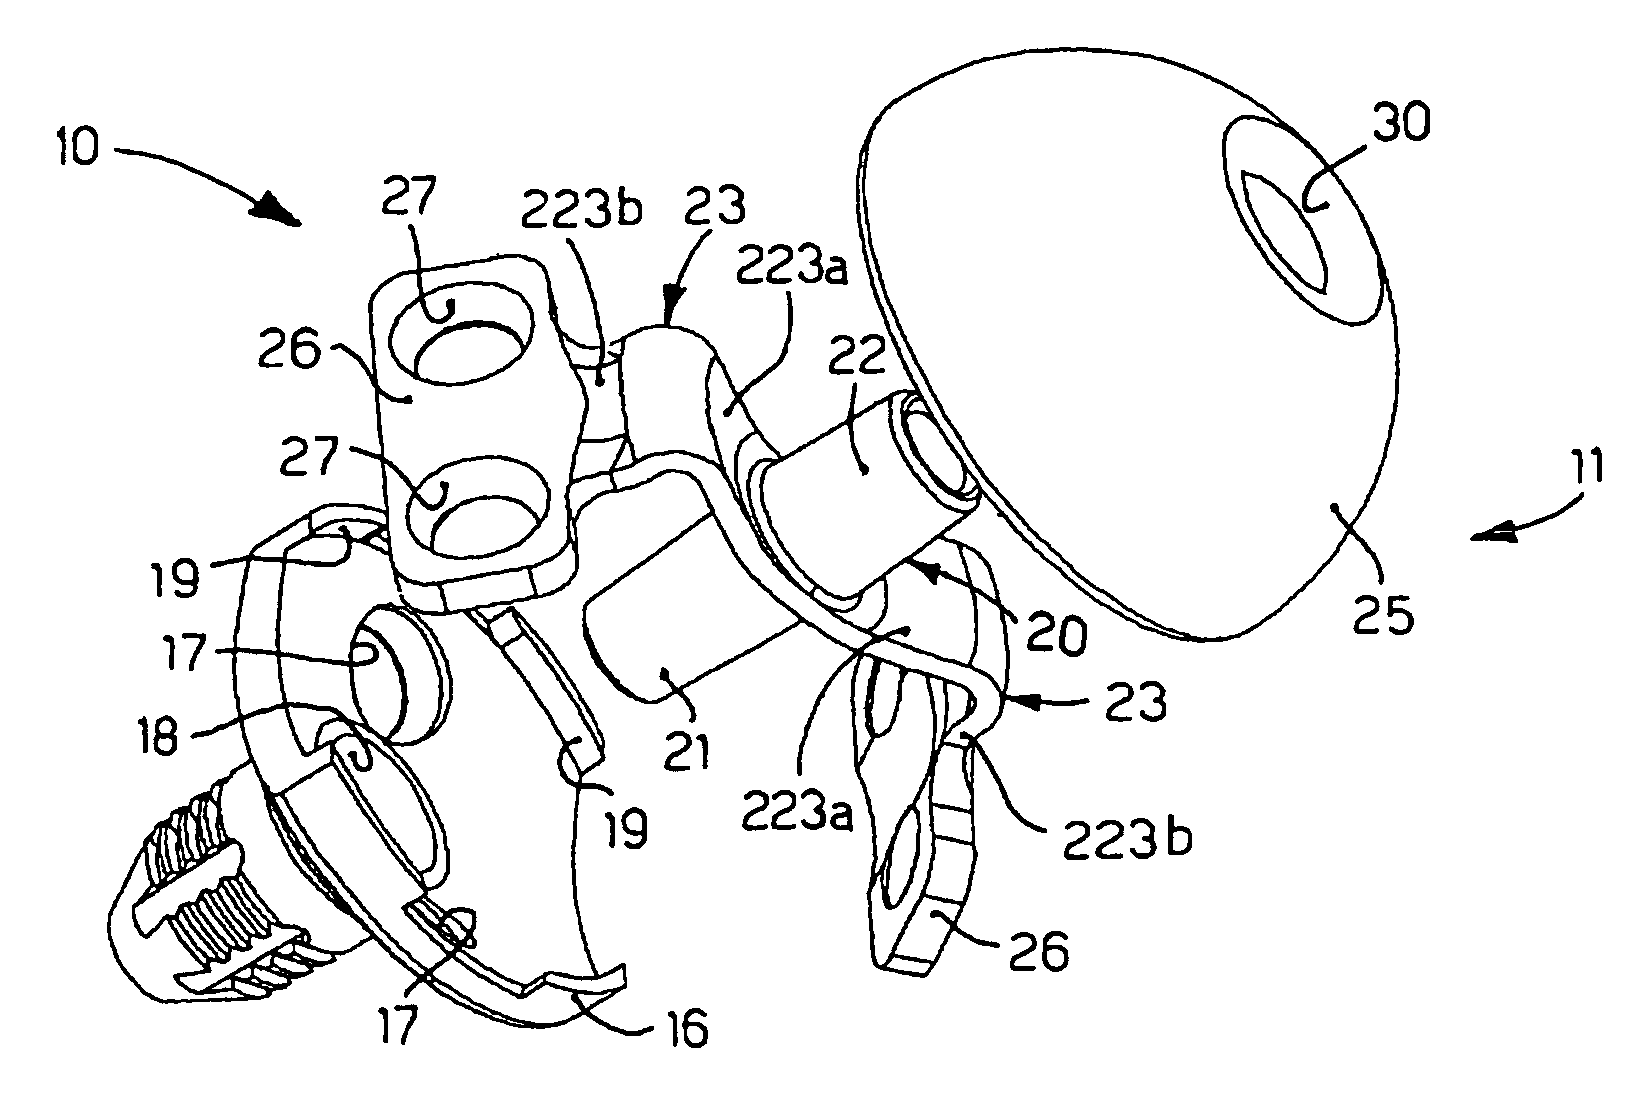 Attachment element for a prosthesis for the articulation of the shoulder